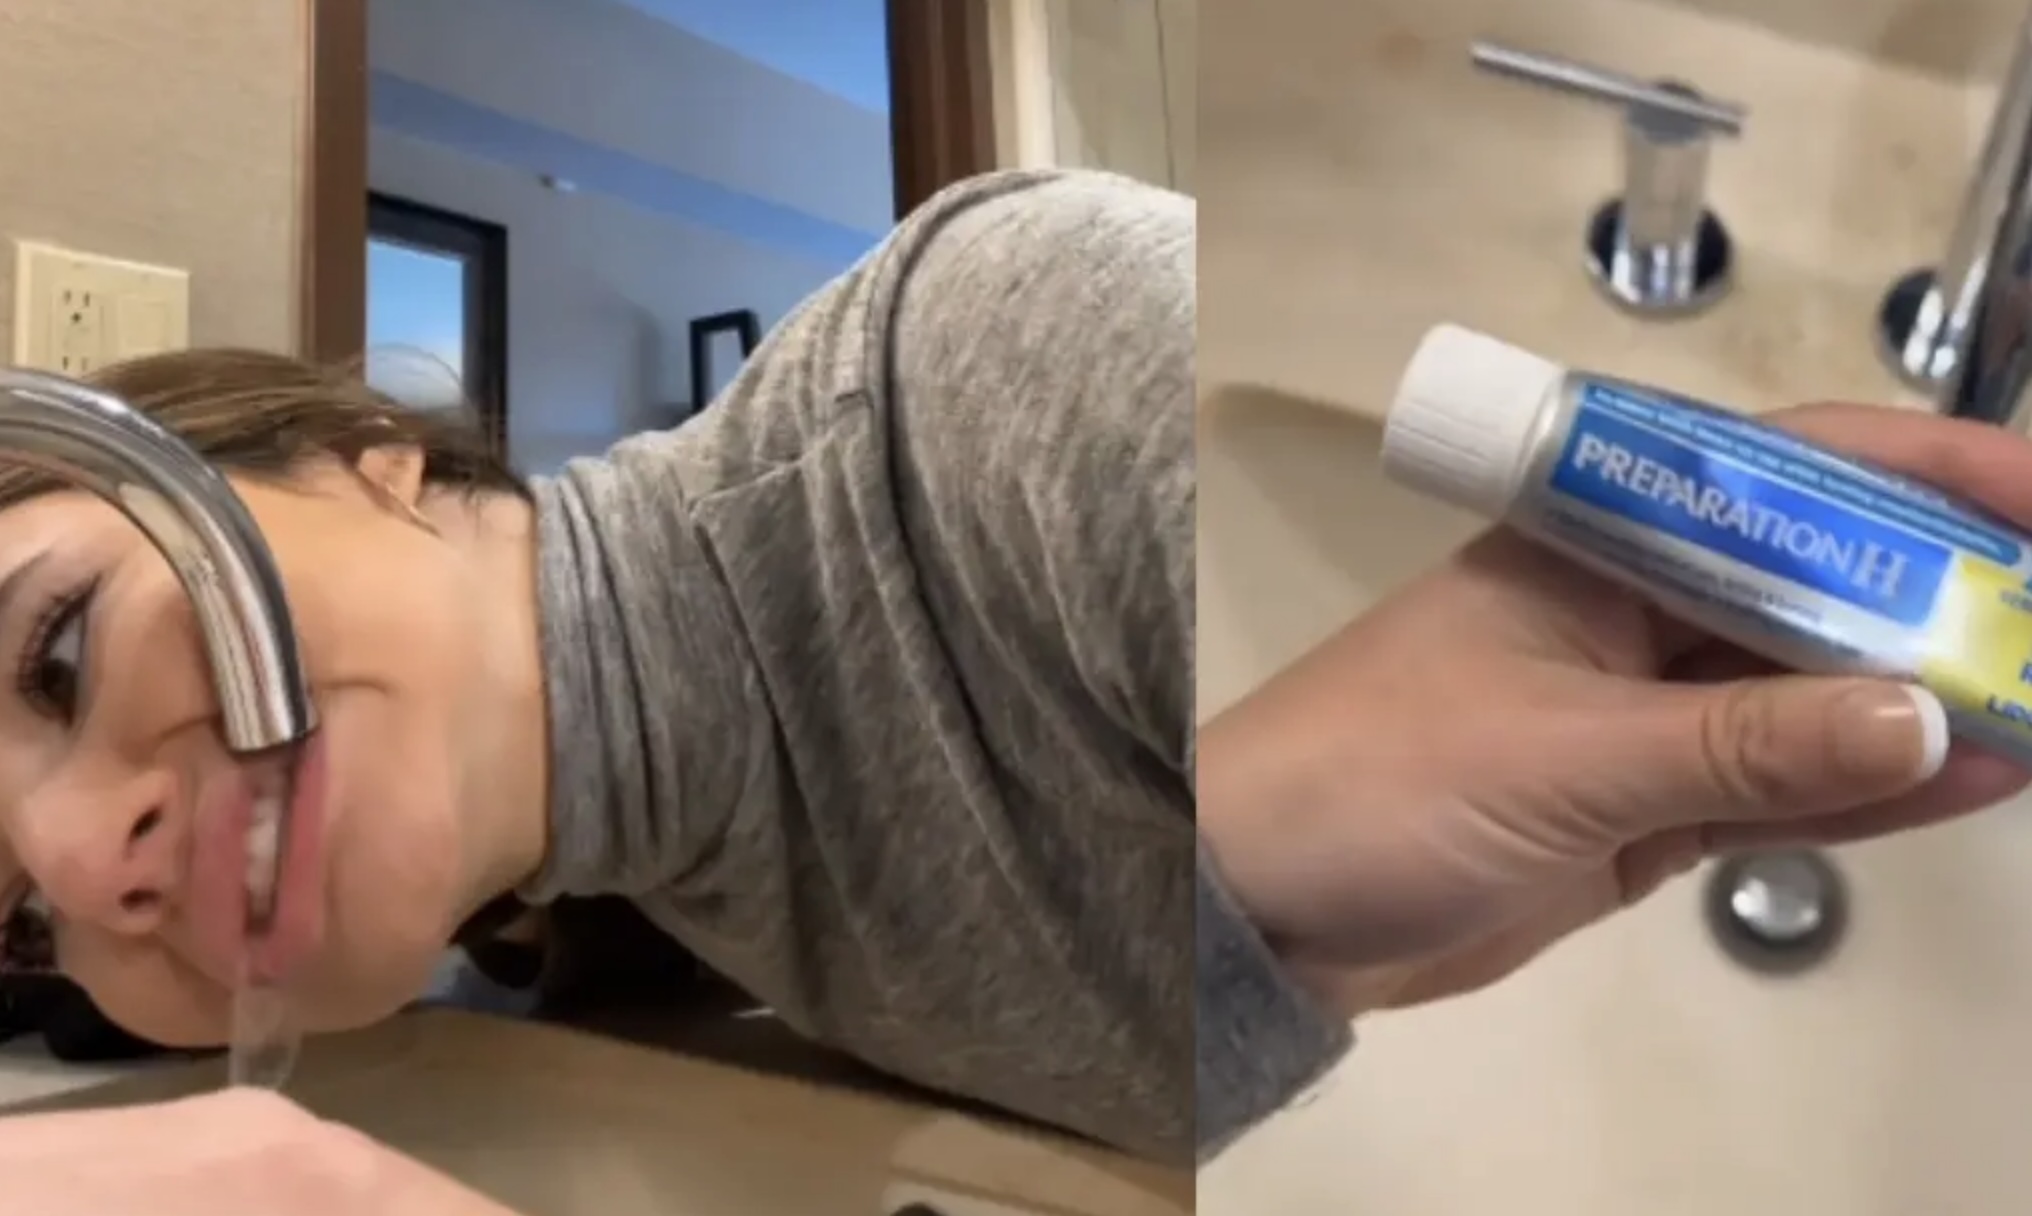 Woman Mistakenly Brushes Teeth with Hemorrhoid Cream